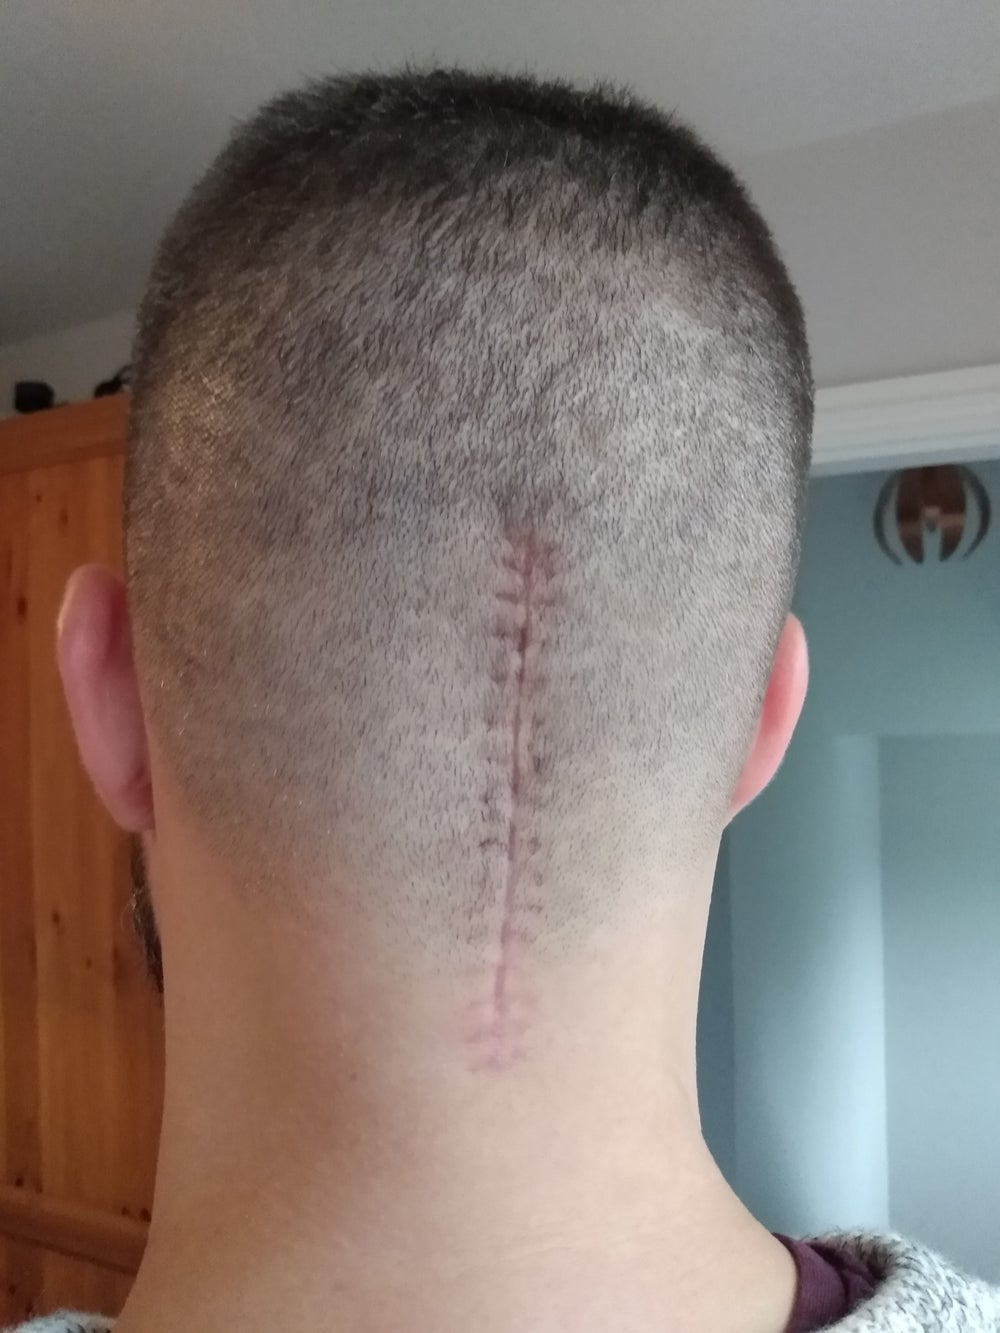 Ben Wilson, 36, with his scar healing (Collect/PA Real Life)